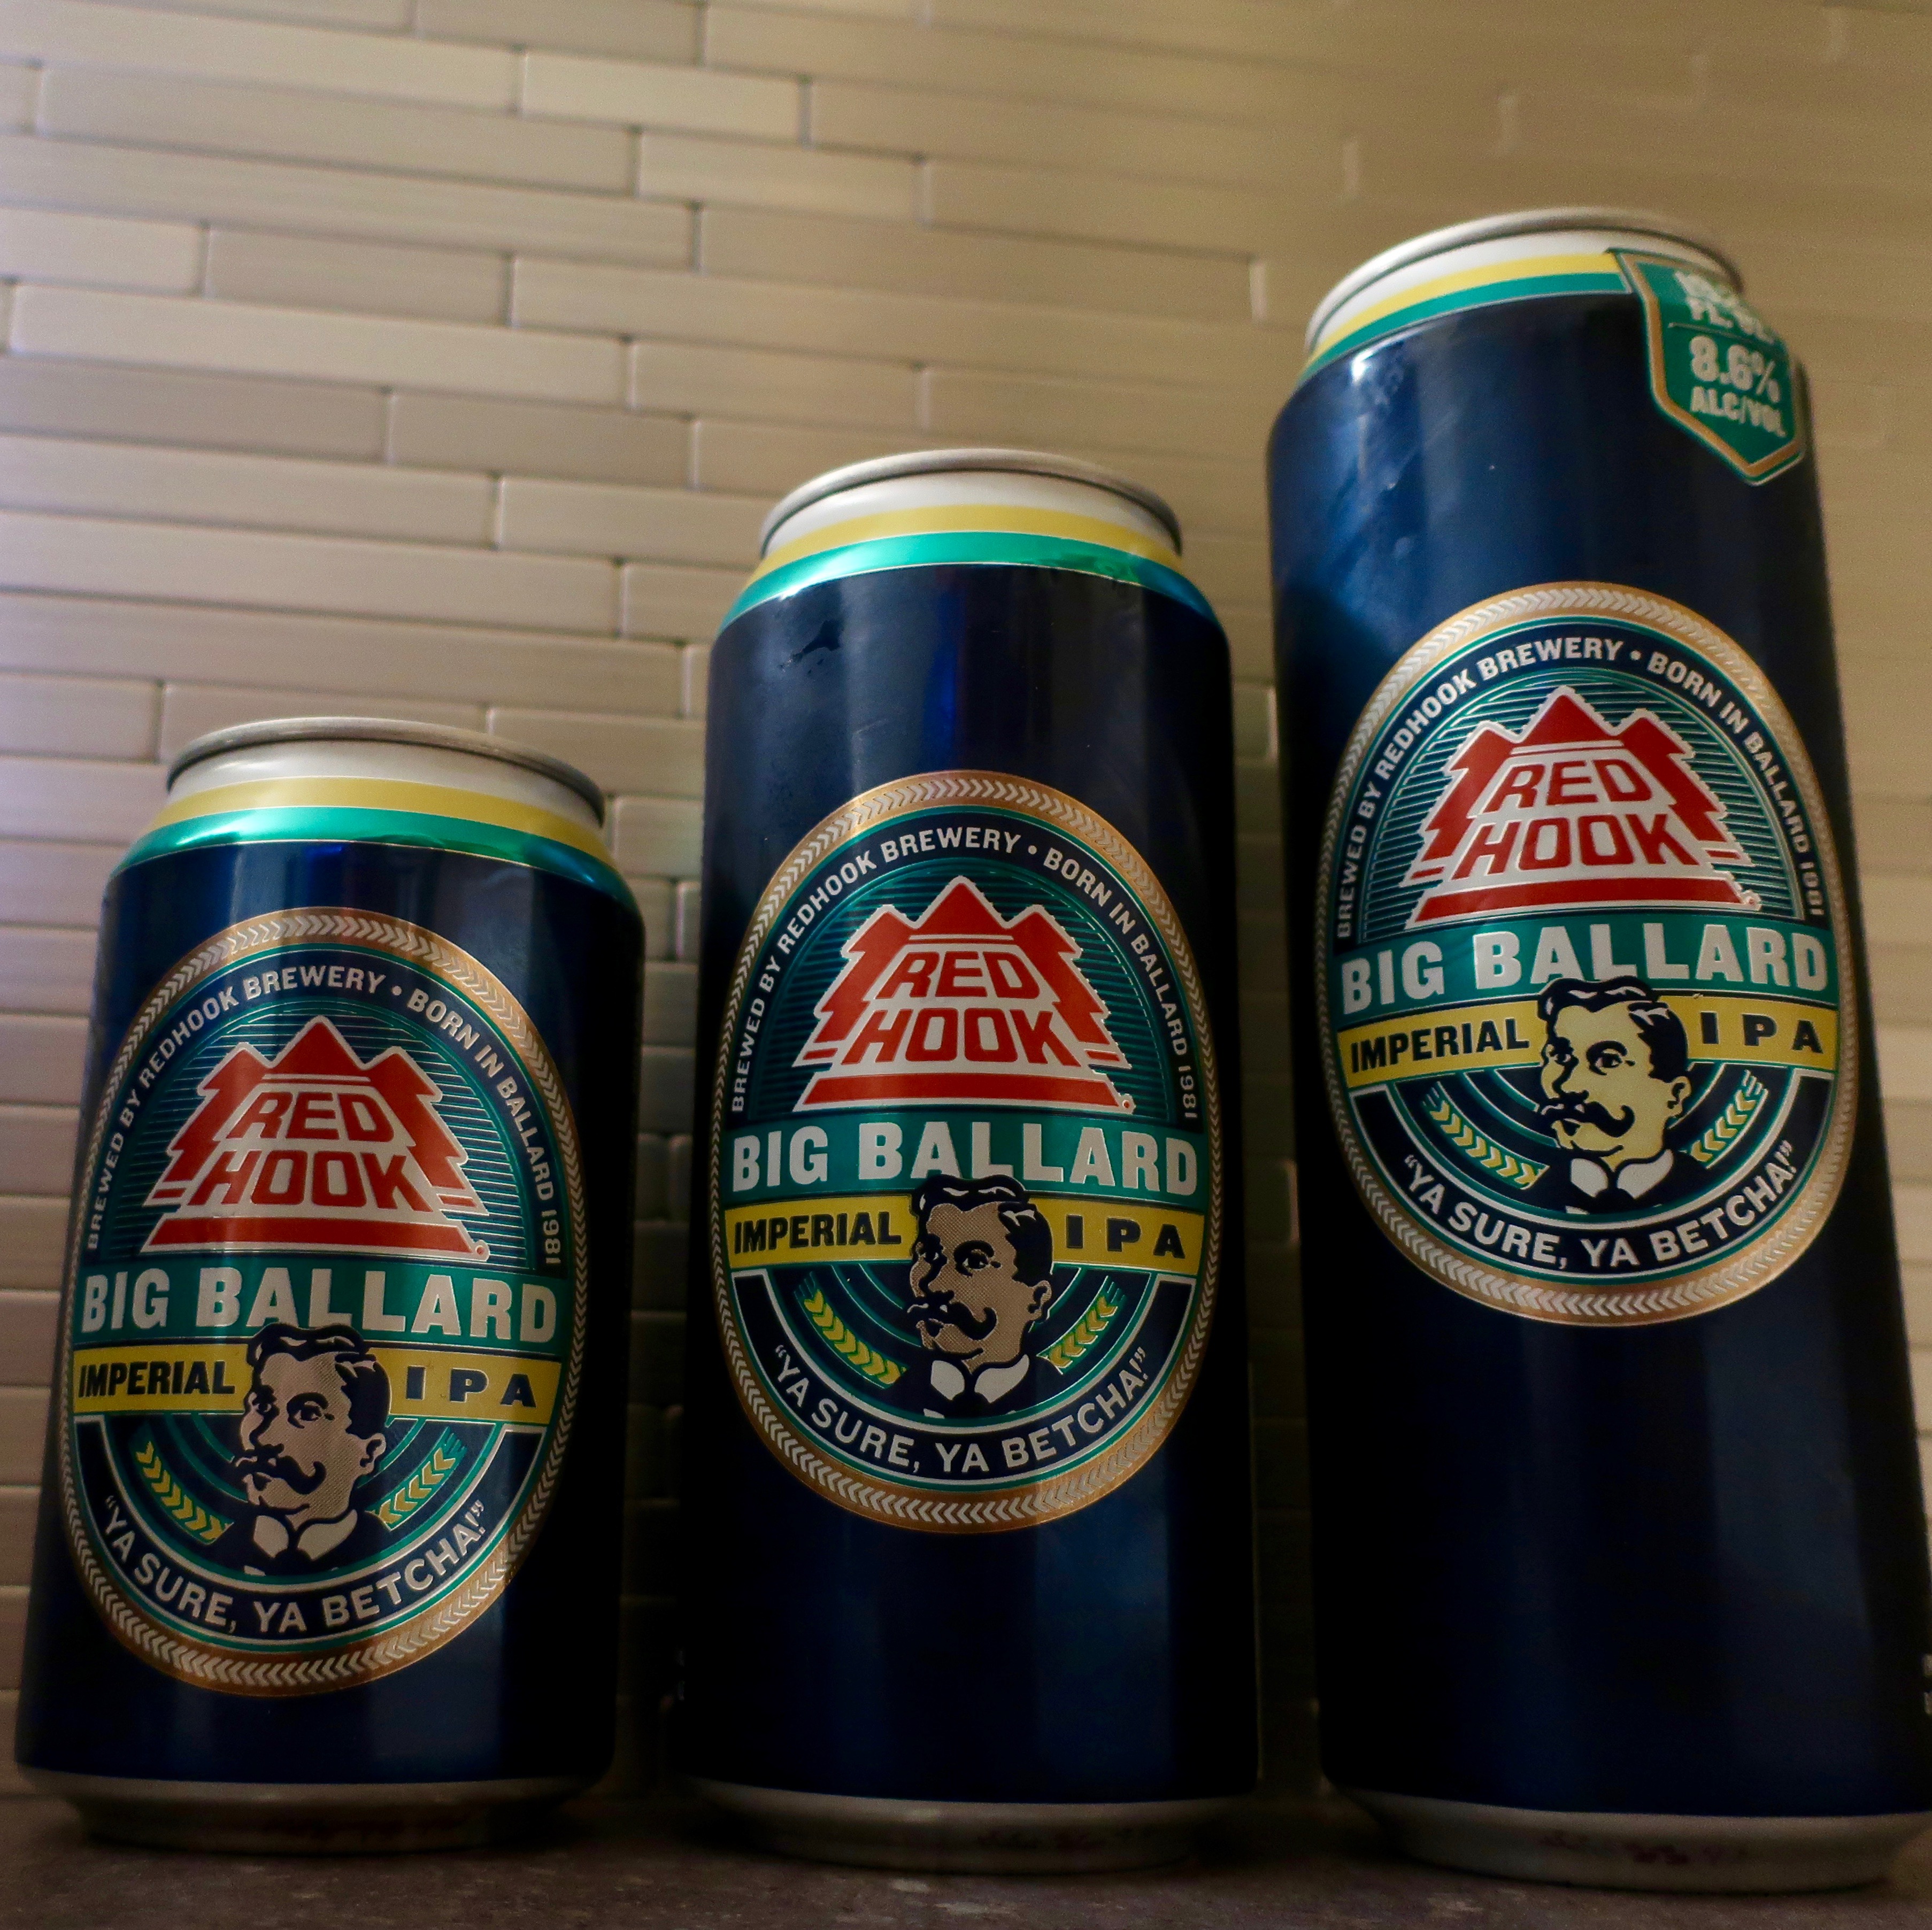 Redhood Big Ballard Imperial IPA is available in 12-ounce, 16-ounce and 19.2-ounce cans.